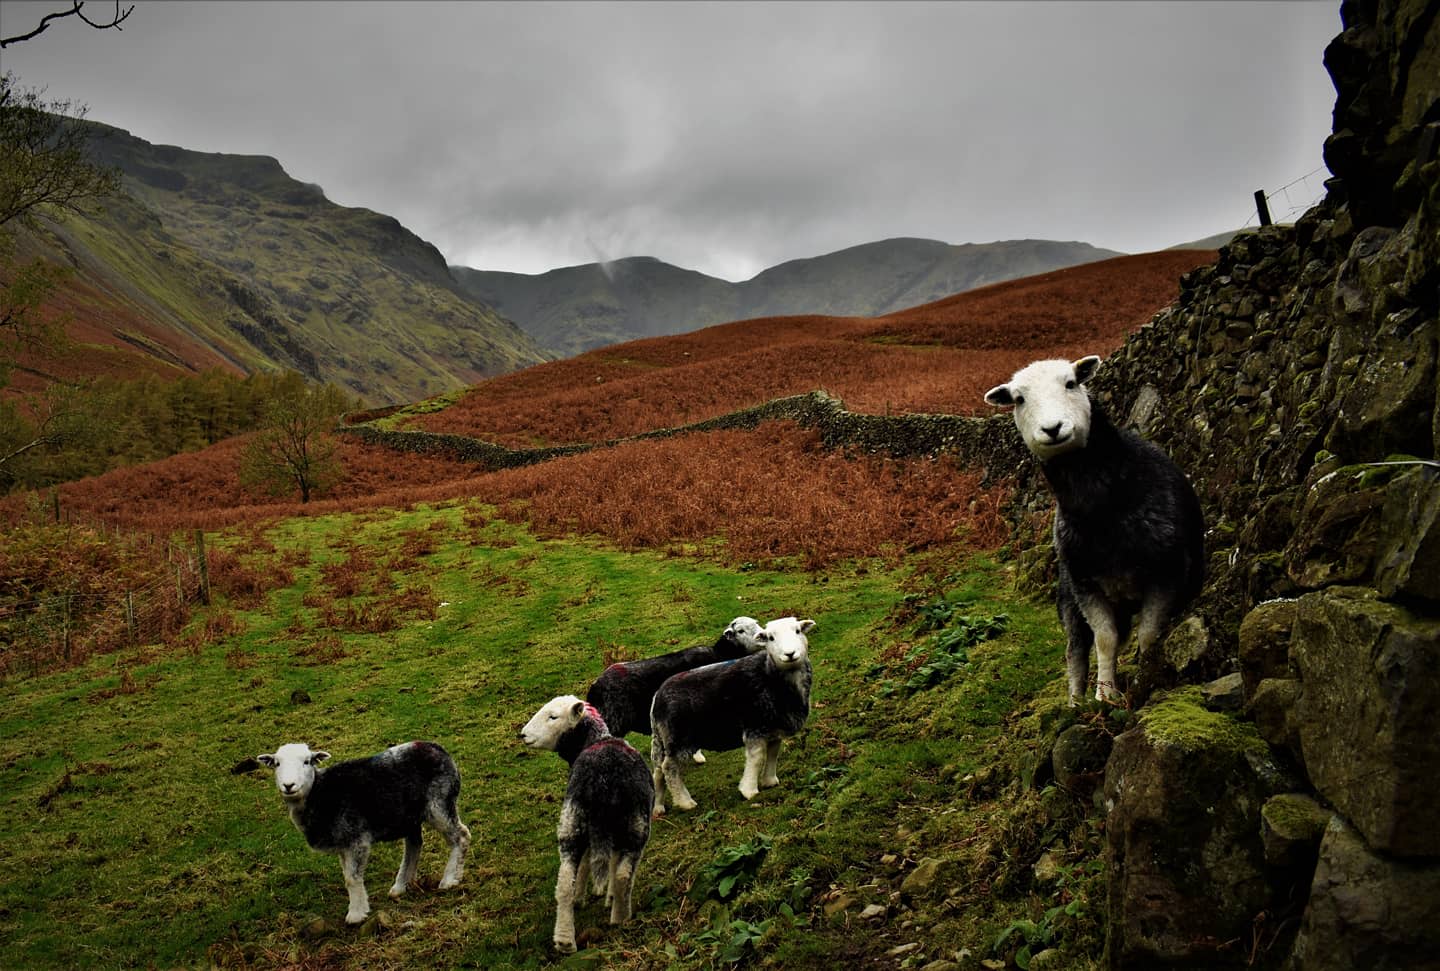 Looking back through old photos, this one was a soaking wet day on the way up to Great Gable when I stumbled into the wrong neighbourhood, Lake District National Park, UK